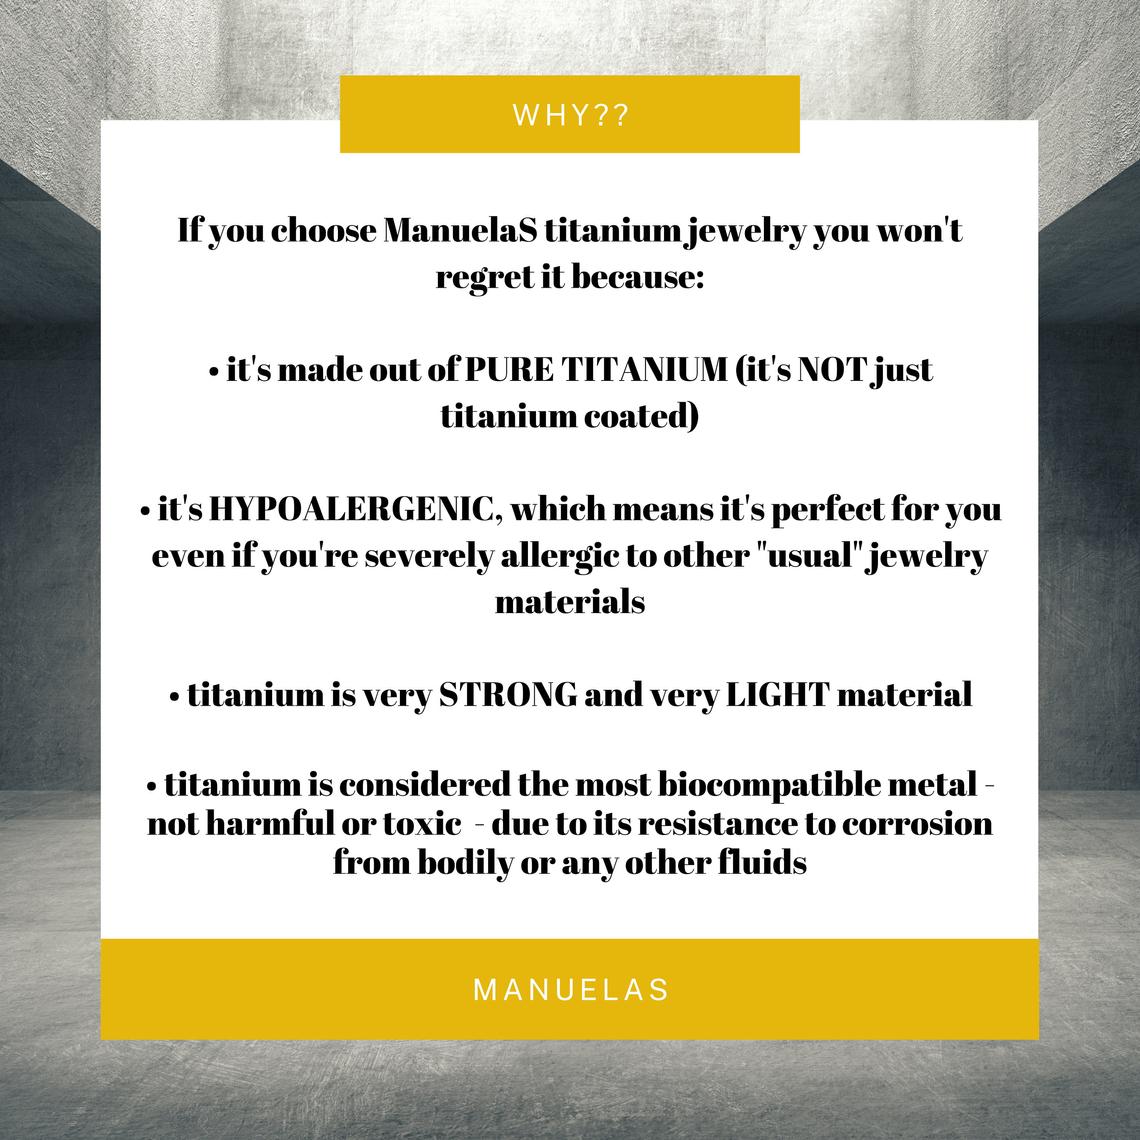 Why titanium, why choose titanium jewelry, pure titanium, hypoalergenic, allergic reactions, jewelry material, strong, light, biocomaptible metal, not harmful, not toxic, resistant, corrosion, fluids, 